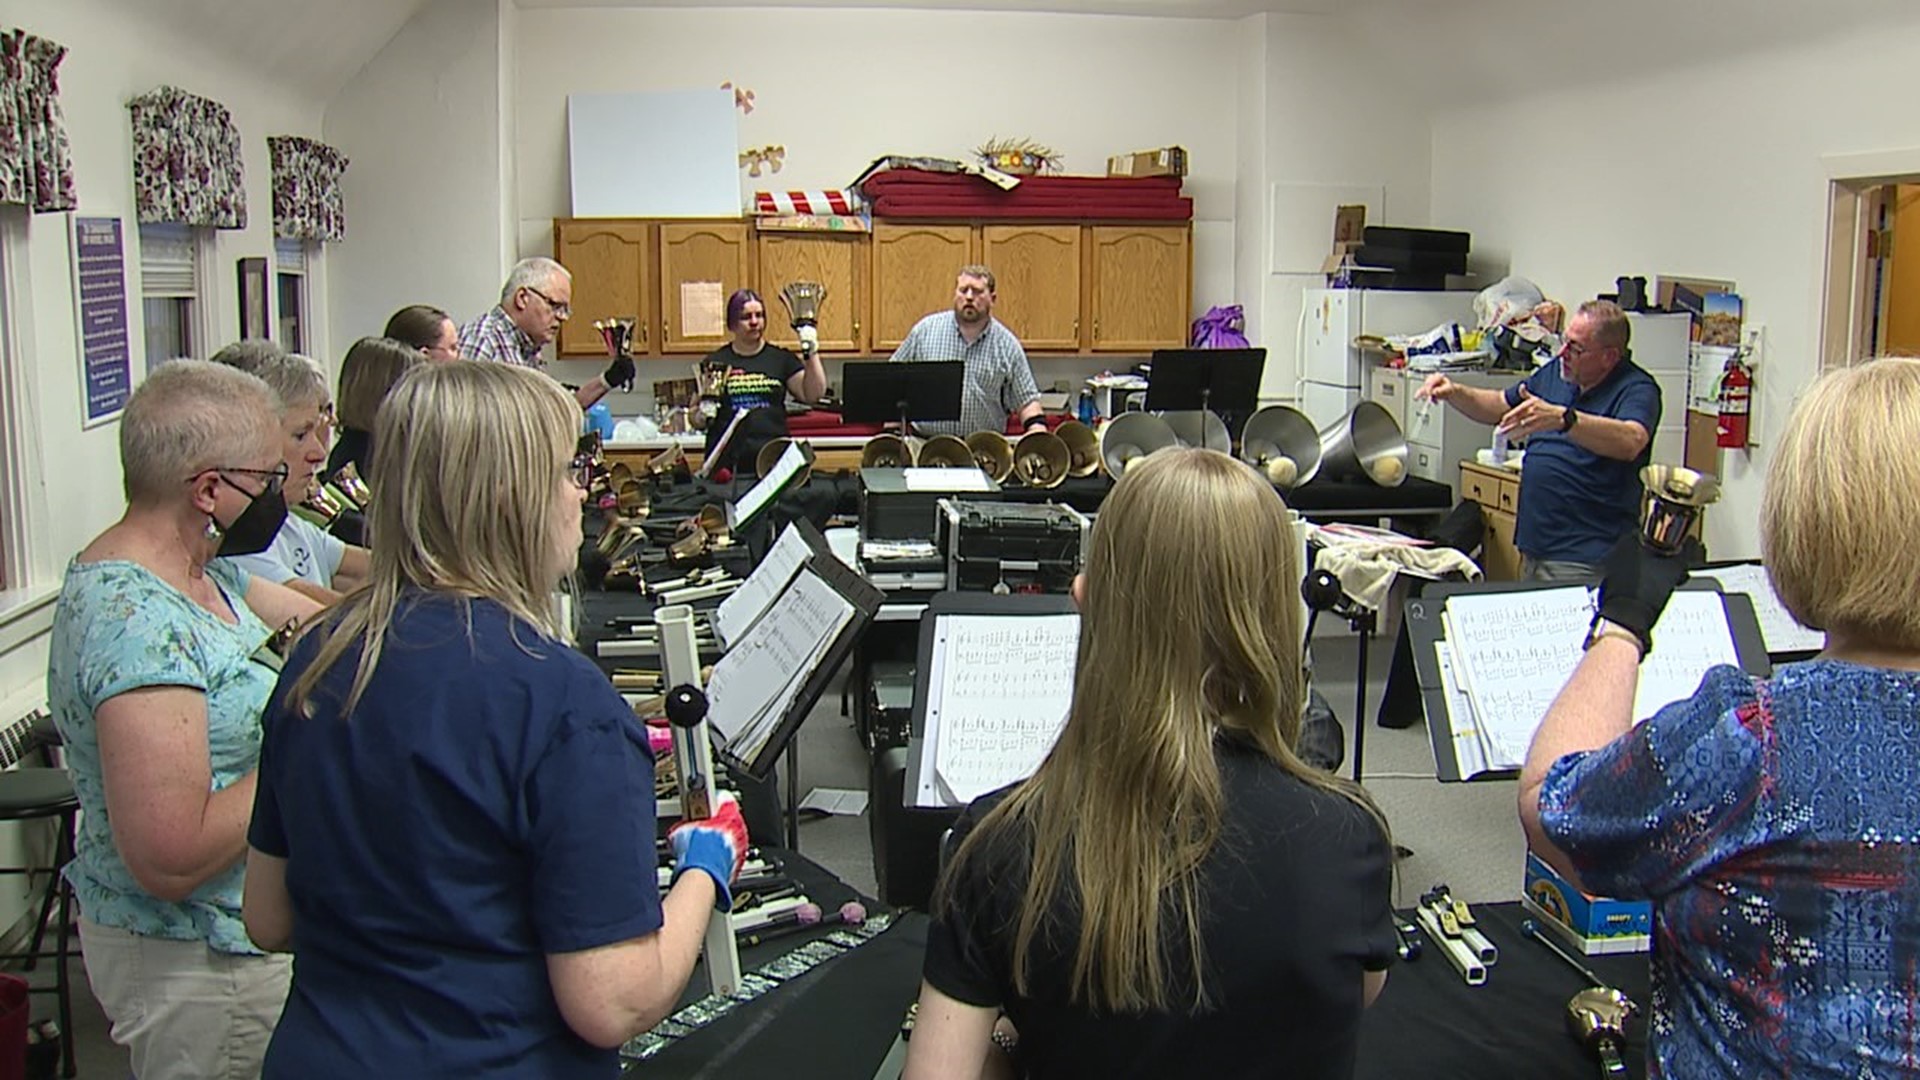 RiverBend Bronze has spent nearly 40 hours rehearsing and preparing for their upcoming spring concerts.